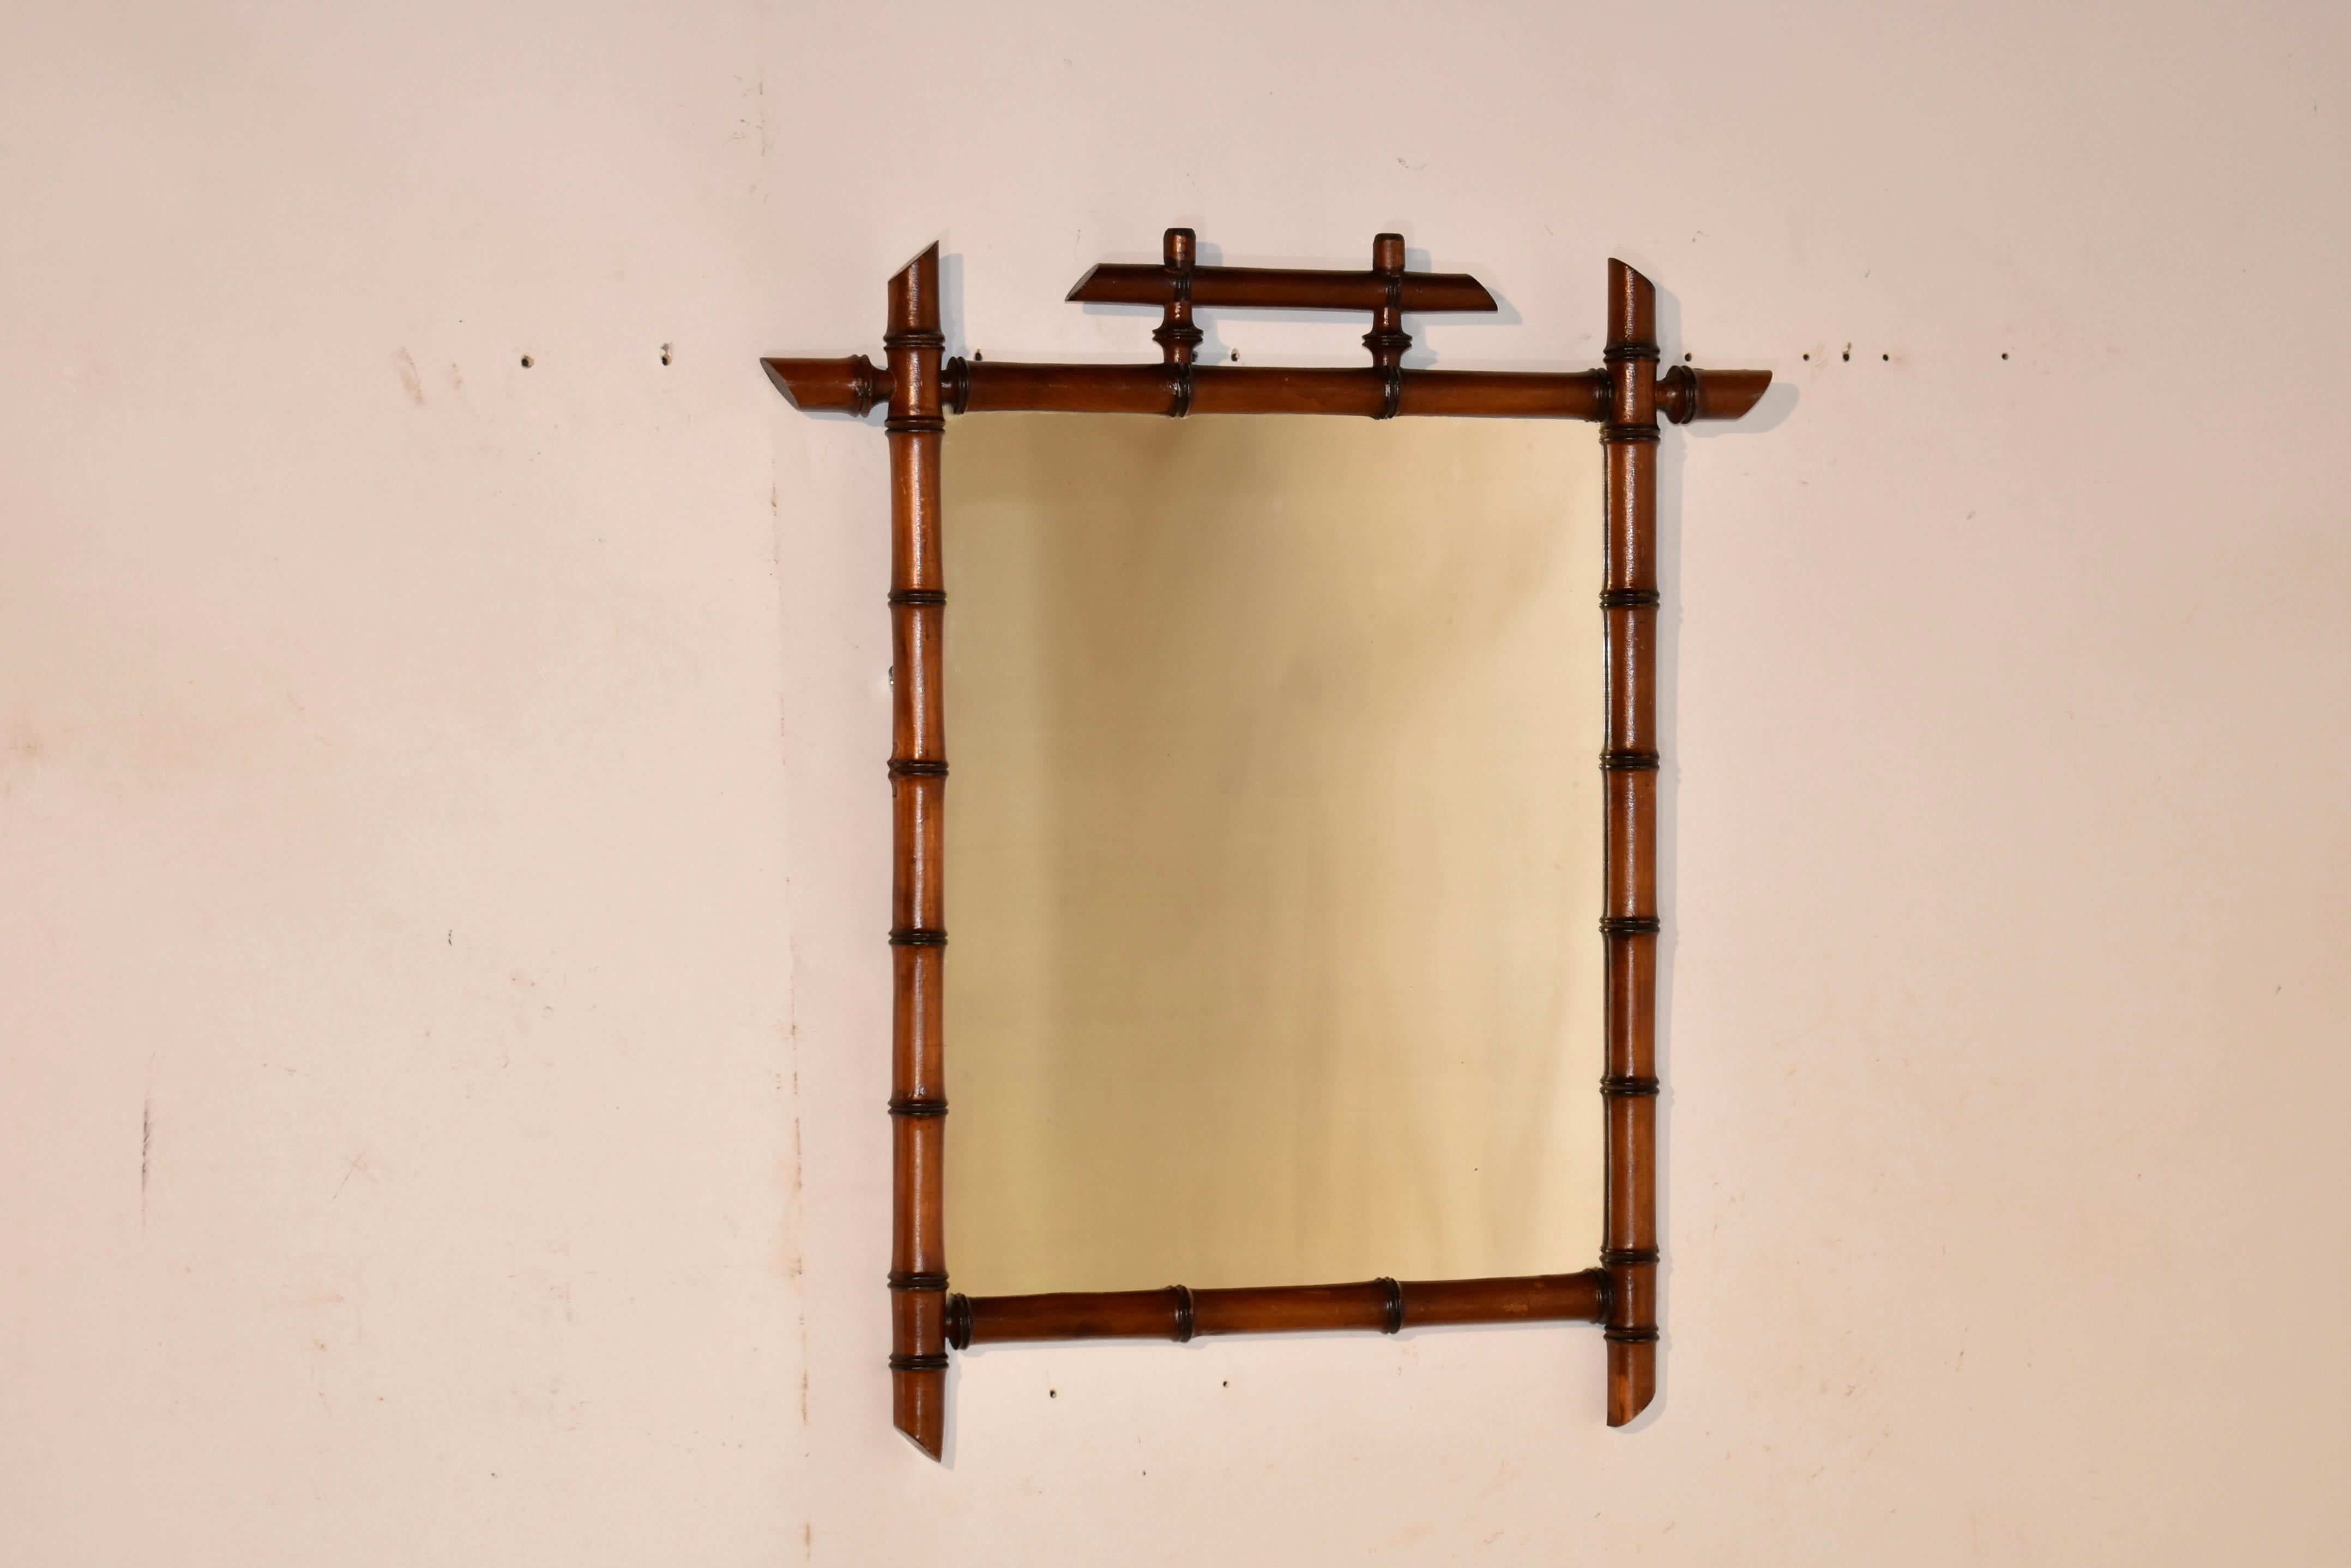 Late 19th century faux bamboo mirror from France.  The framing is hand turned from cherry to give the appearance of bamboo.  The frame surrounds a mirror, which has honest wear from age and use.